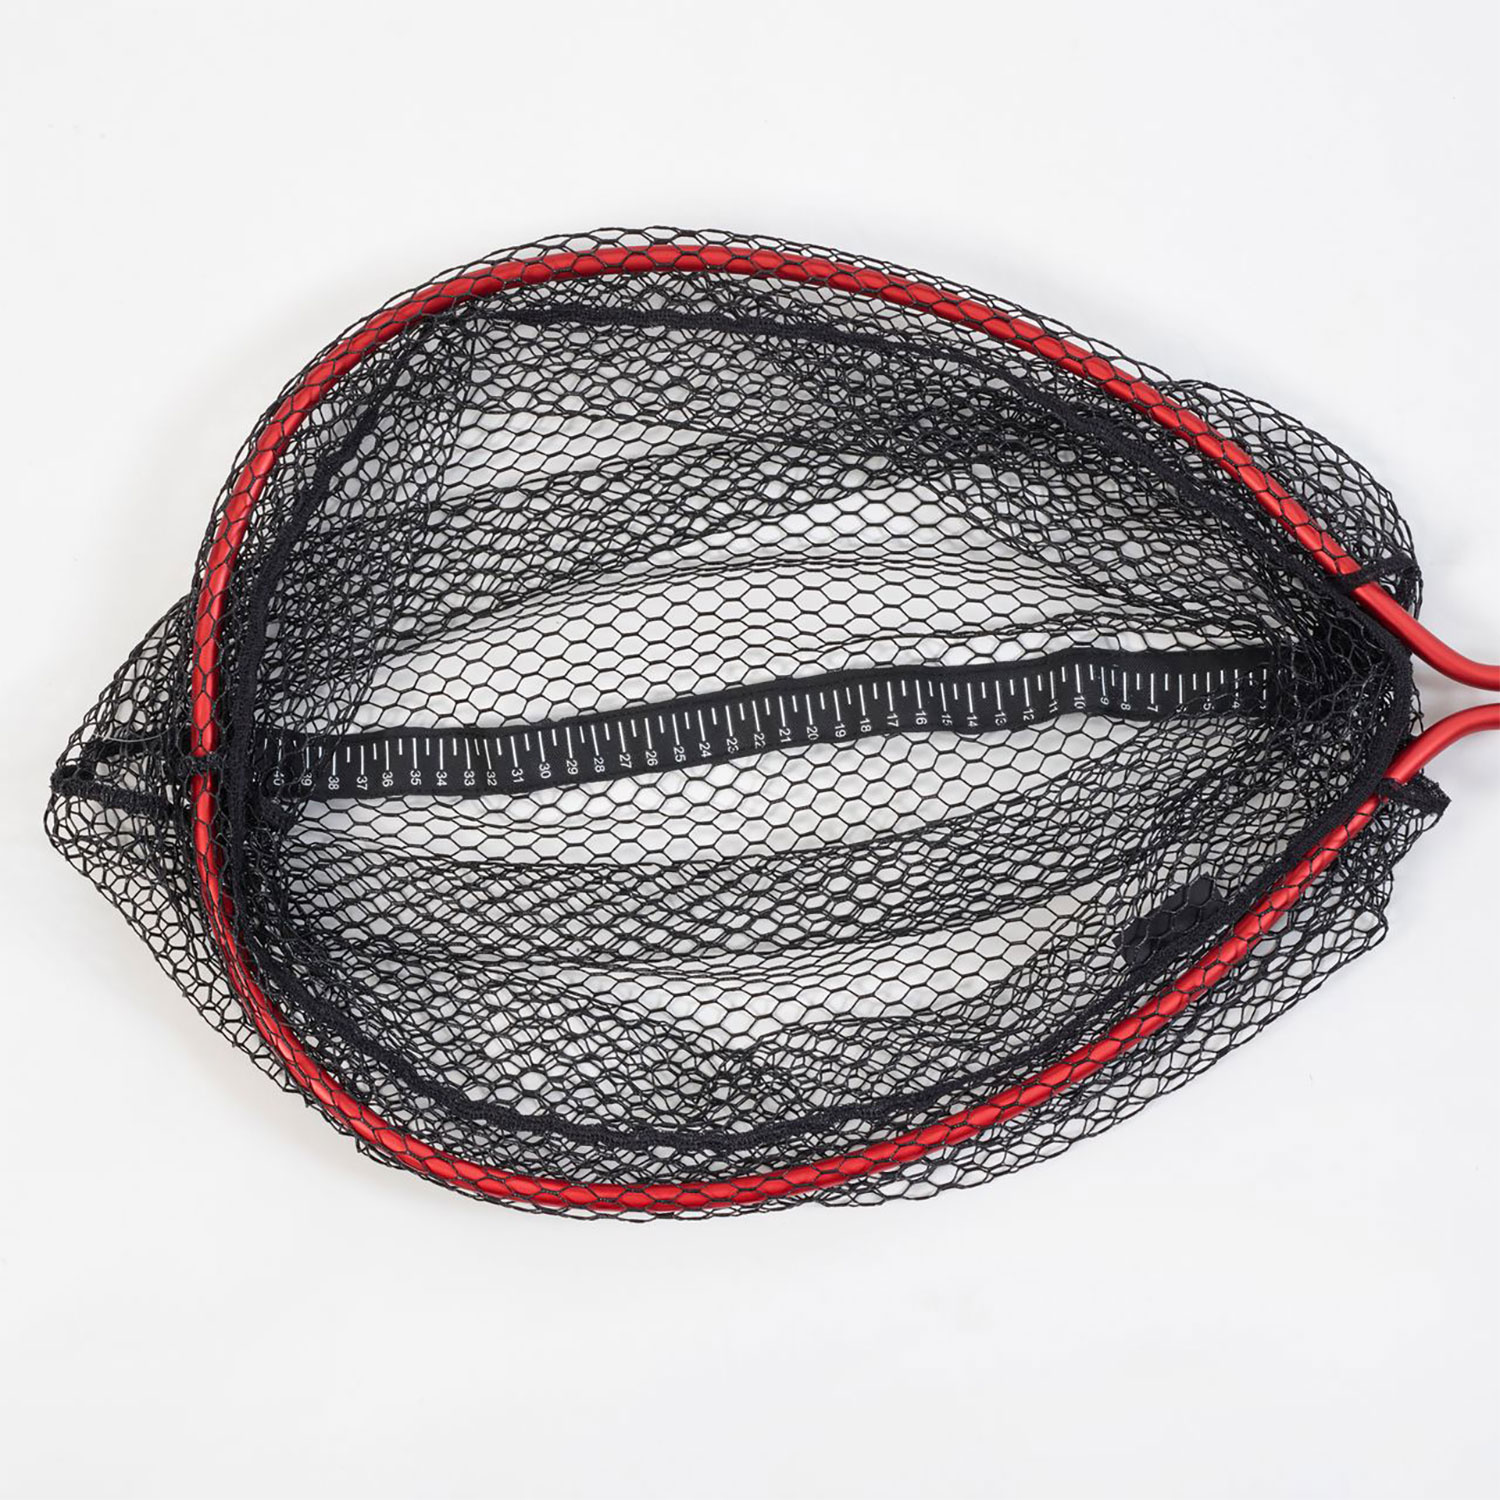 McLean Rubber Net Bag M with Measure Scale